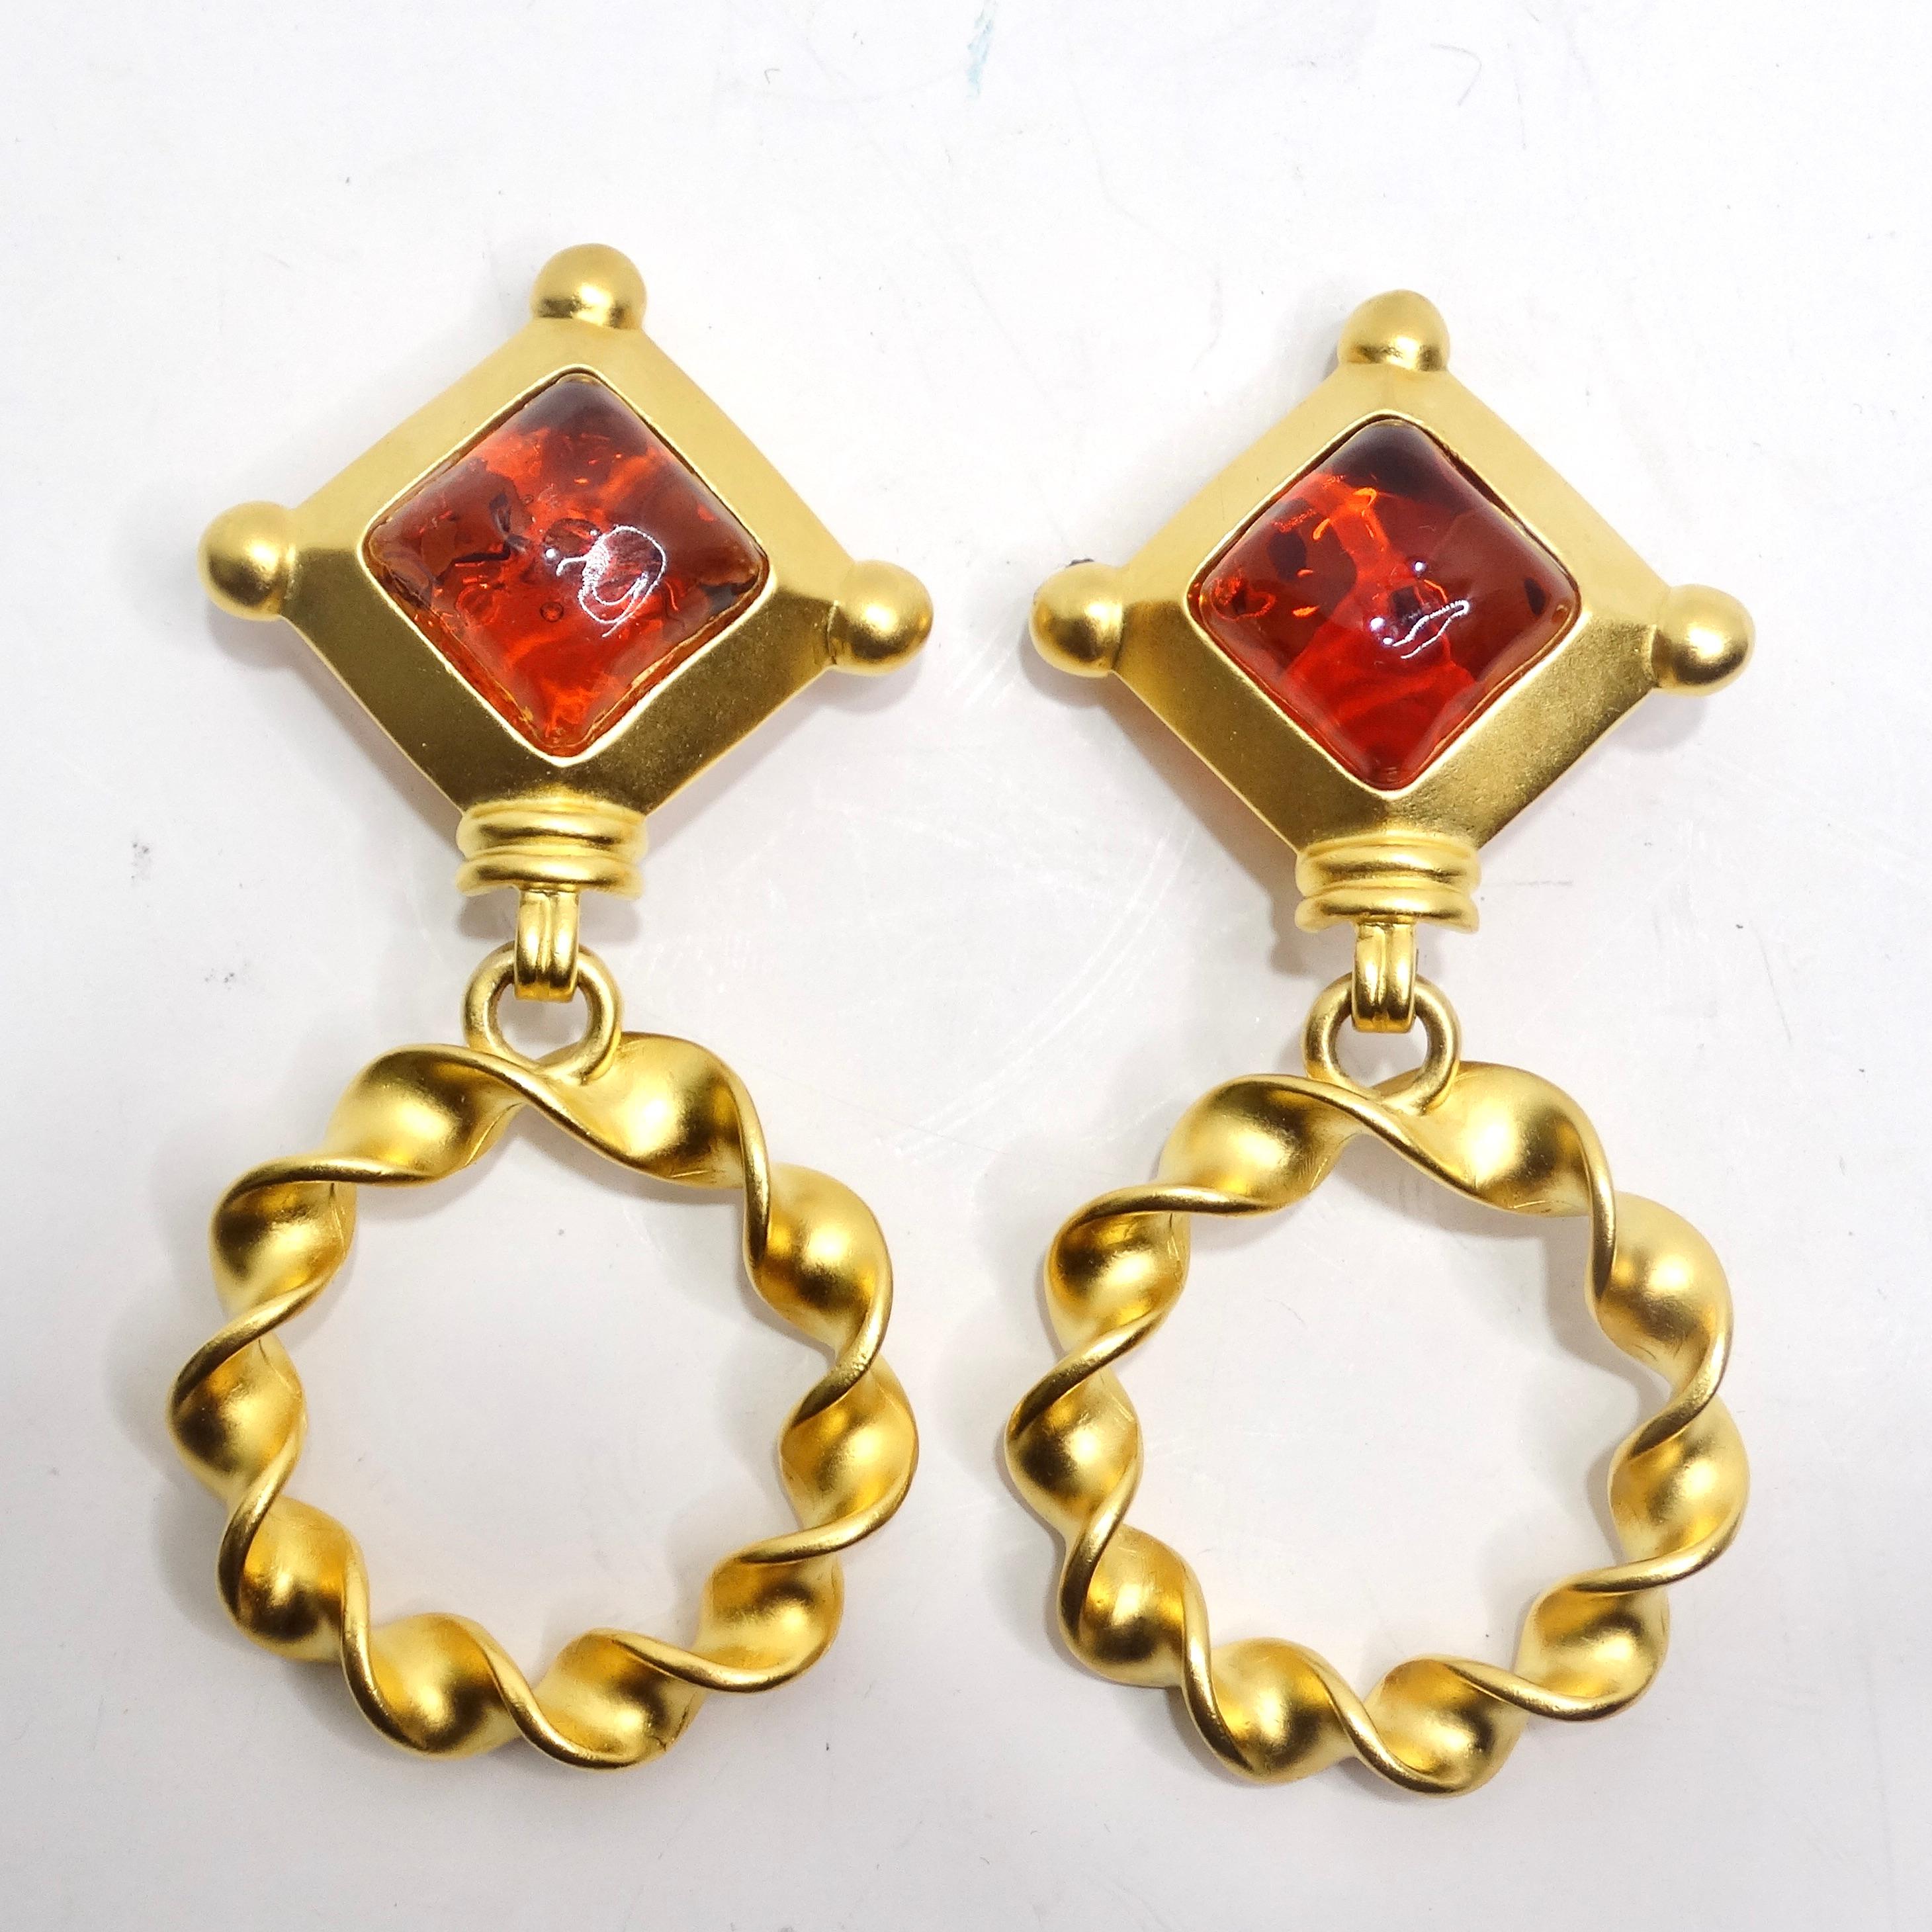 Step into the world of bold elegance with the Karl Lagerfeld 1980s Gold Plated Red Stone Dangle Earrings. These stunning yellow gold plated earrings are a true vintage masterpiece, featuring a captivating blood orange diamond-shaped stone encased in